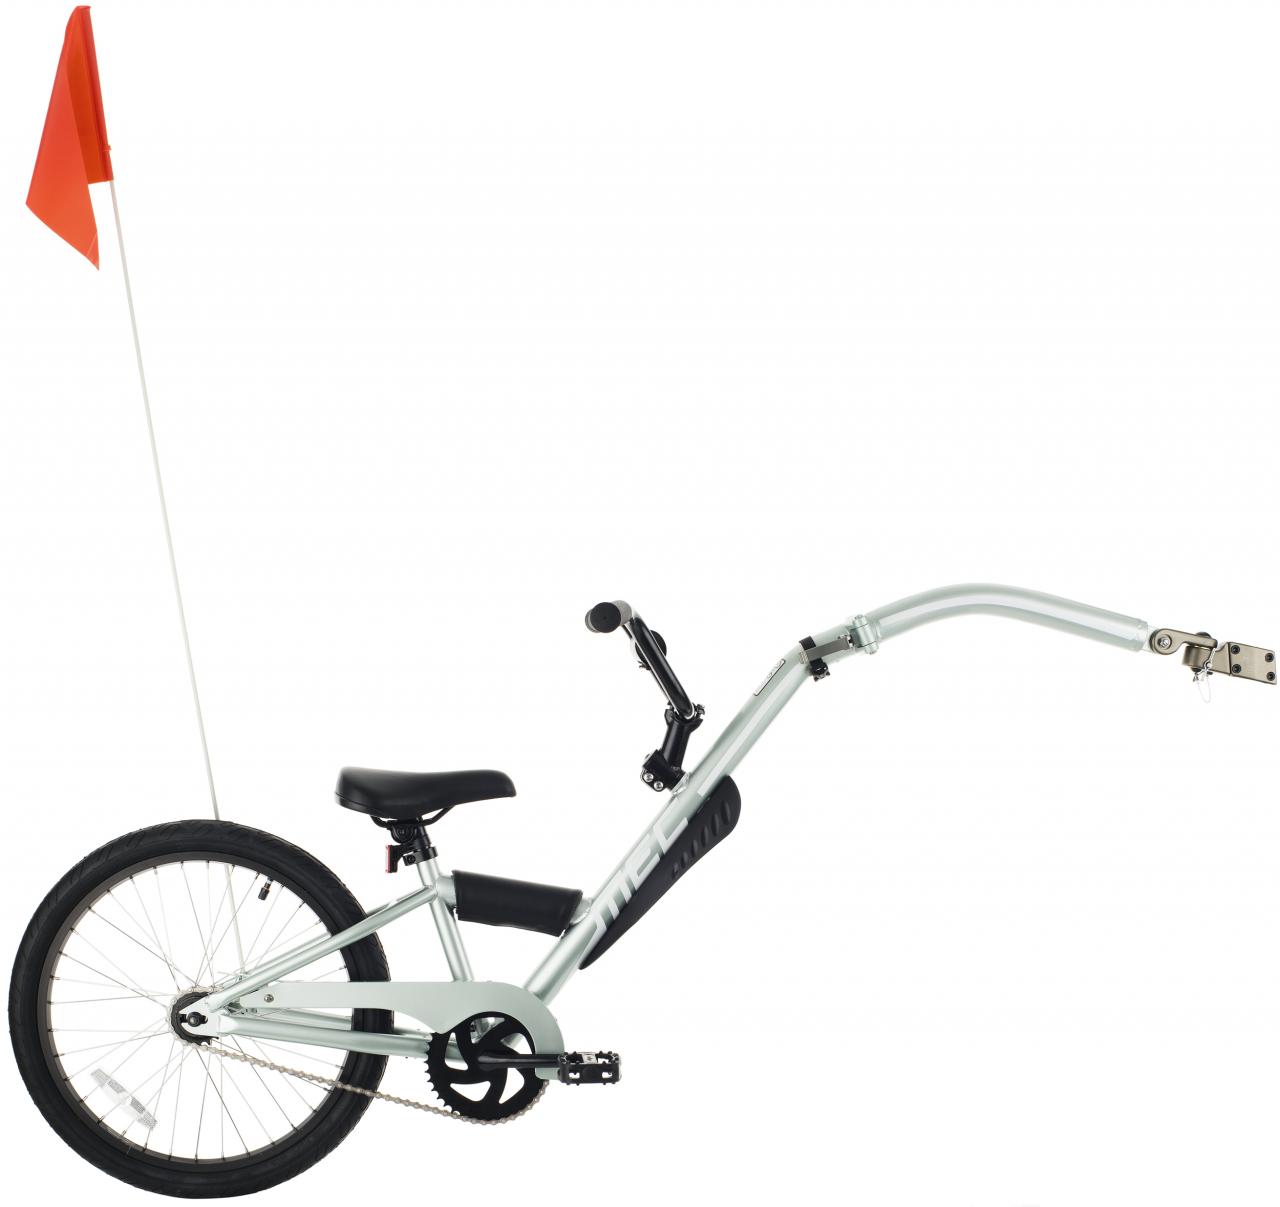 MEC Lift Trailer Bicycle - Youths